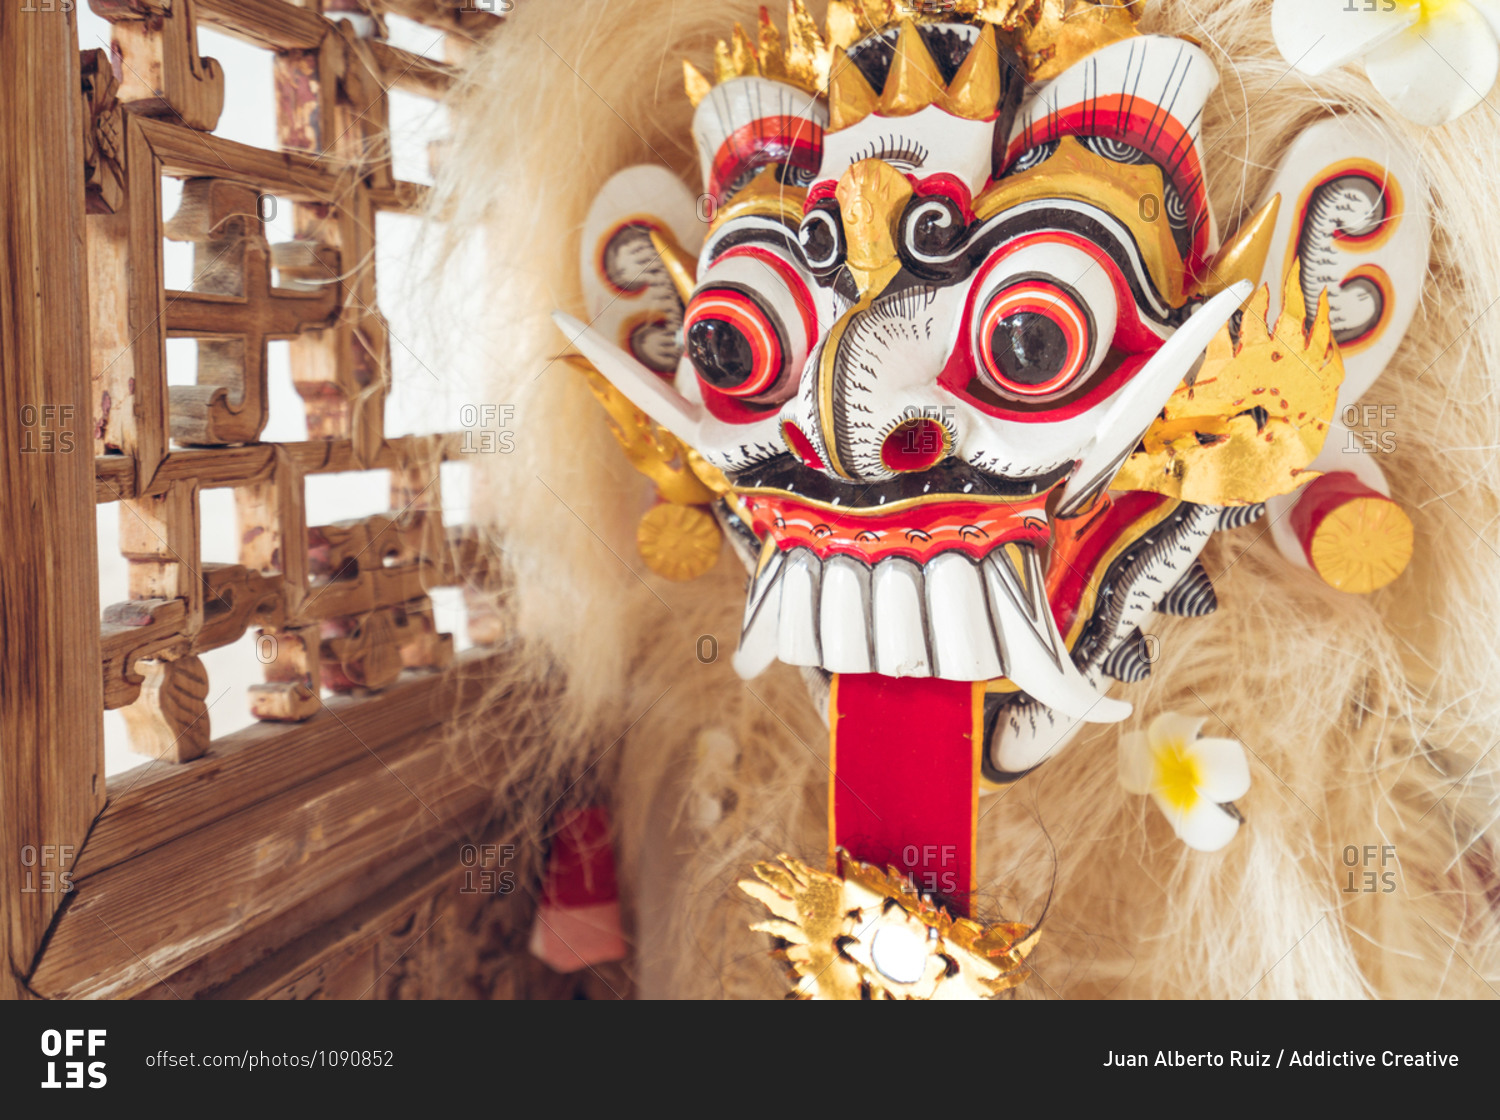 Authentic Asian lion figure with fur and colorful ornament on face used during cultural and religious celebrations and symbolizing luck and fortune placed in hotel in Taiwan